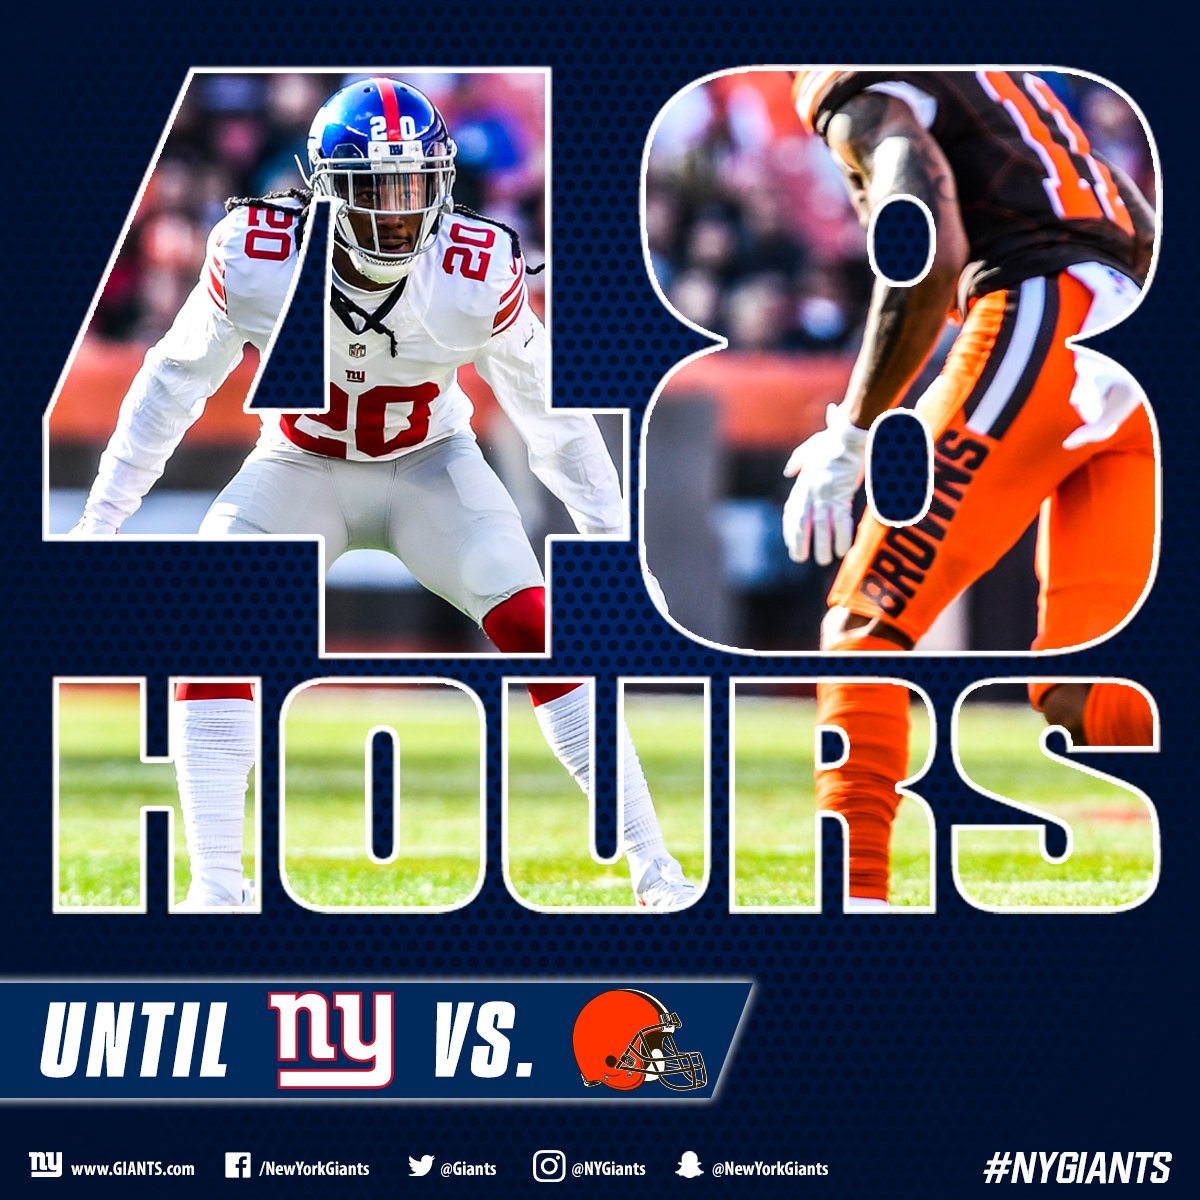 48 HOURS to go until #NYGiants vs. Cleveland! https://t.co/umtF6Mn7yp